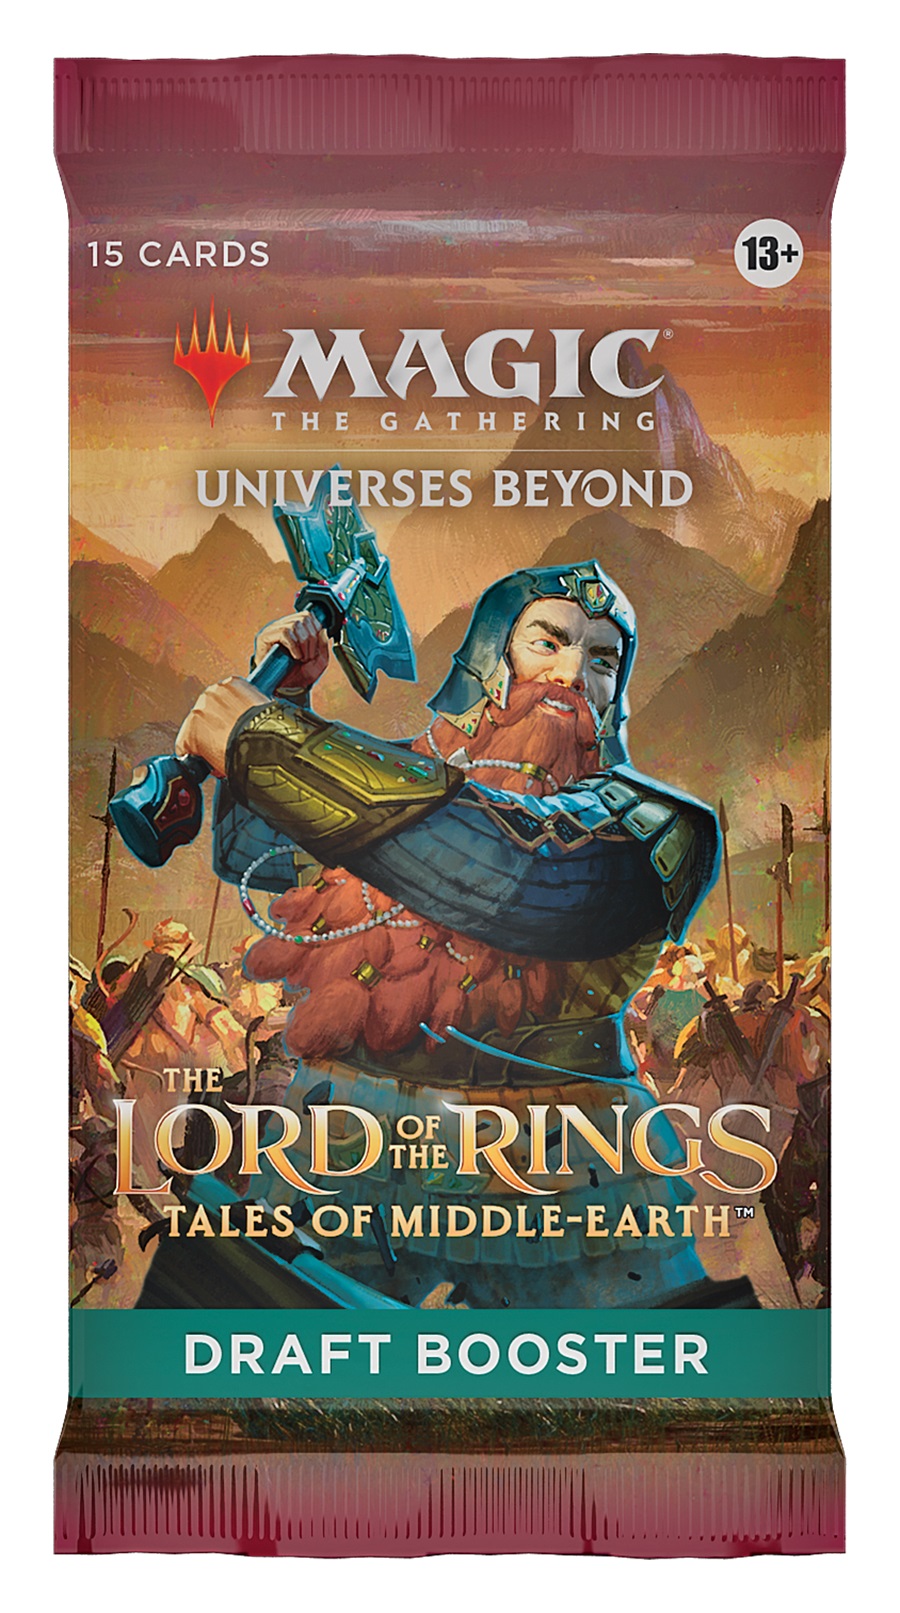 Magic the Gathering: Universes Beyond: The Lord of the Rings: Draft Booster Pack 